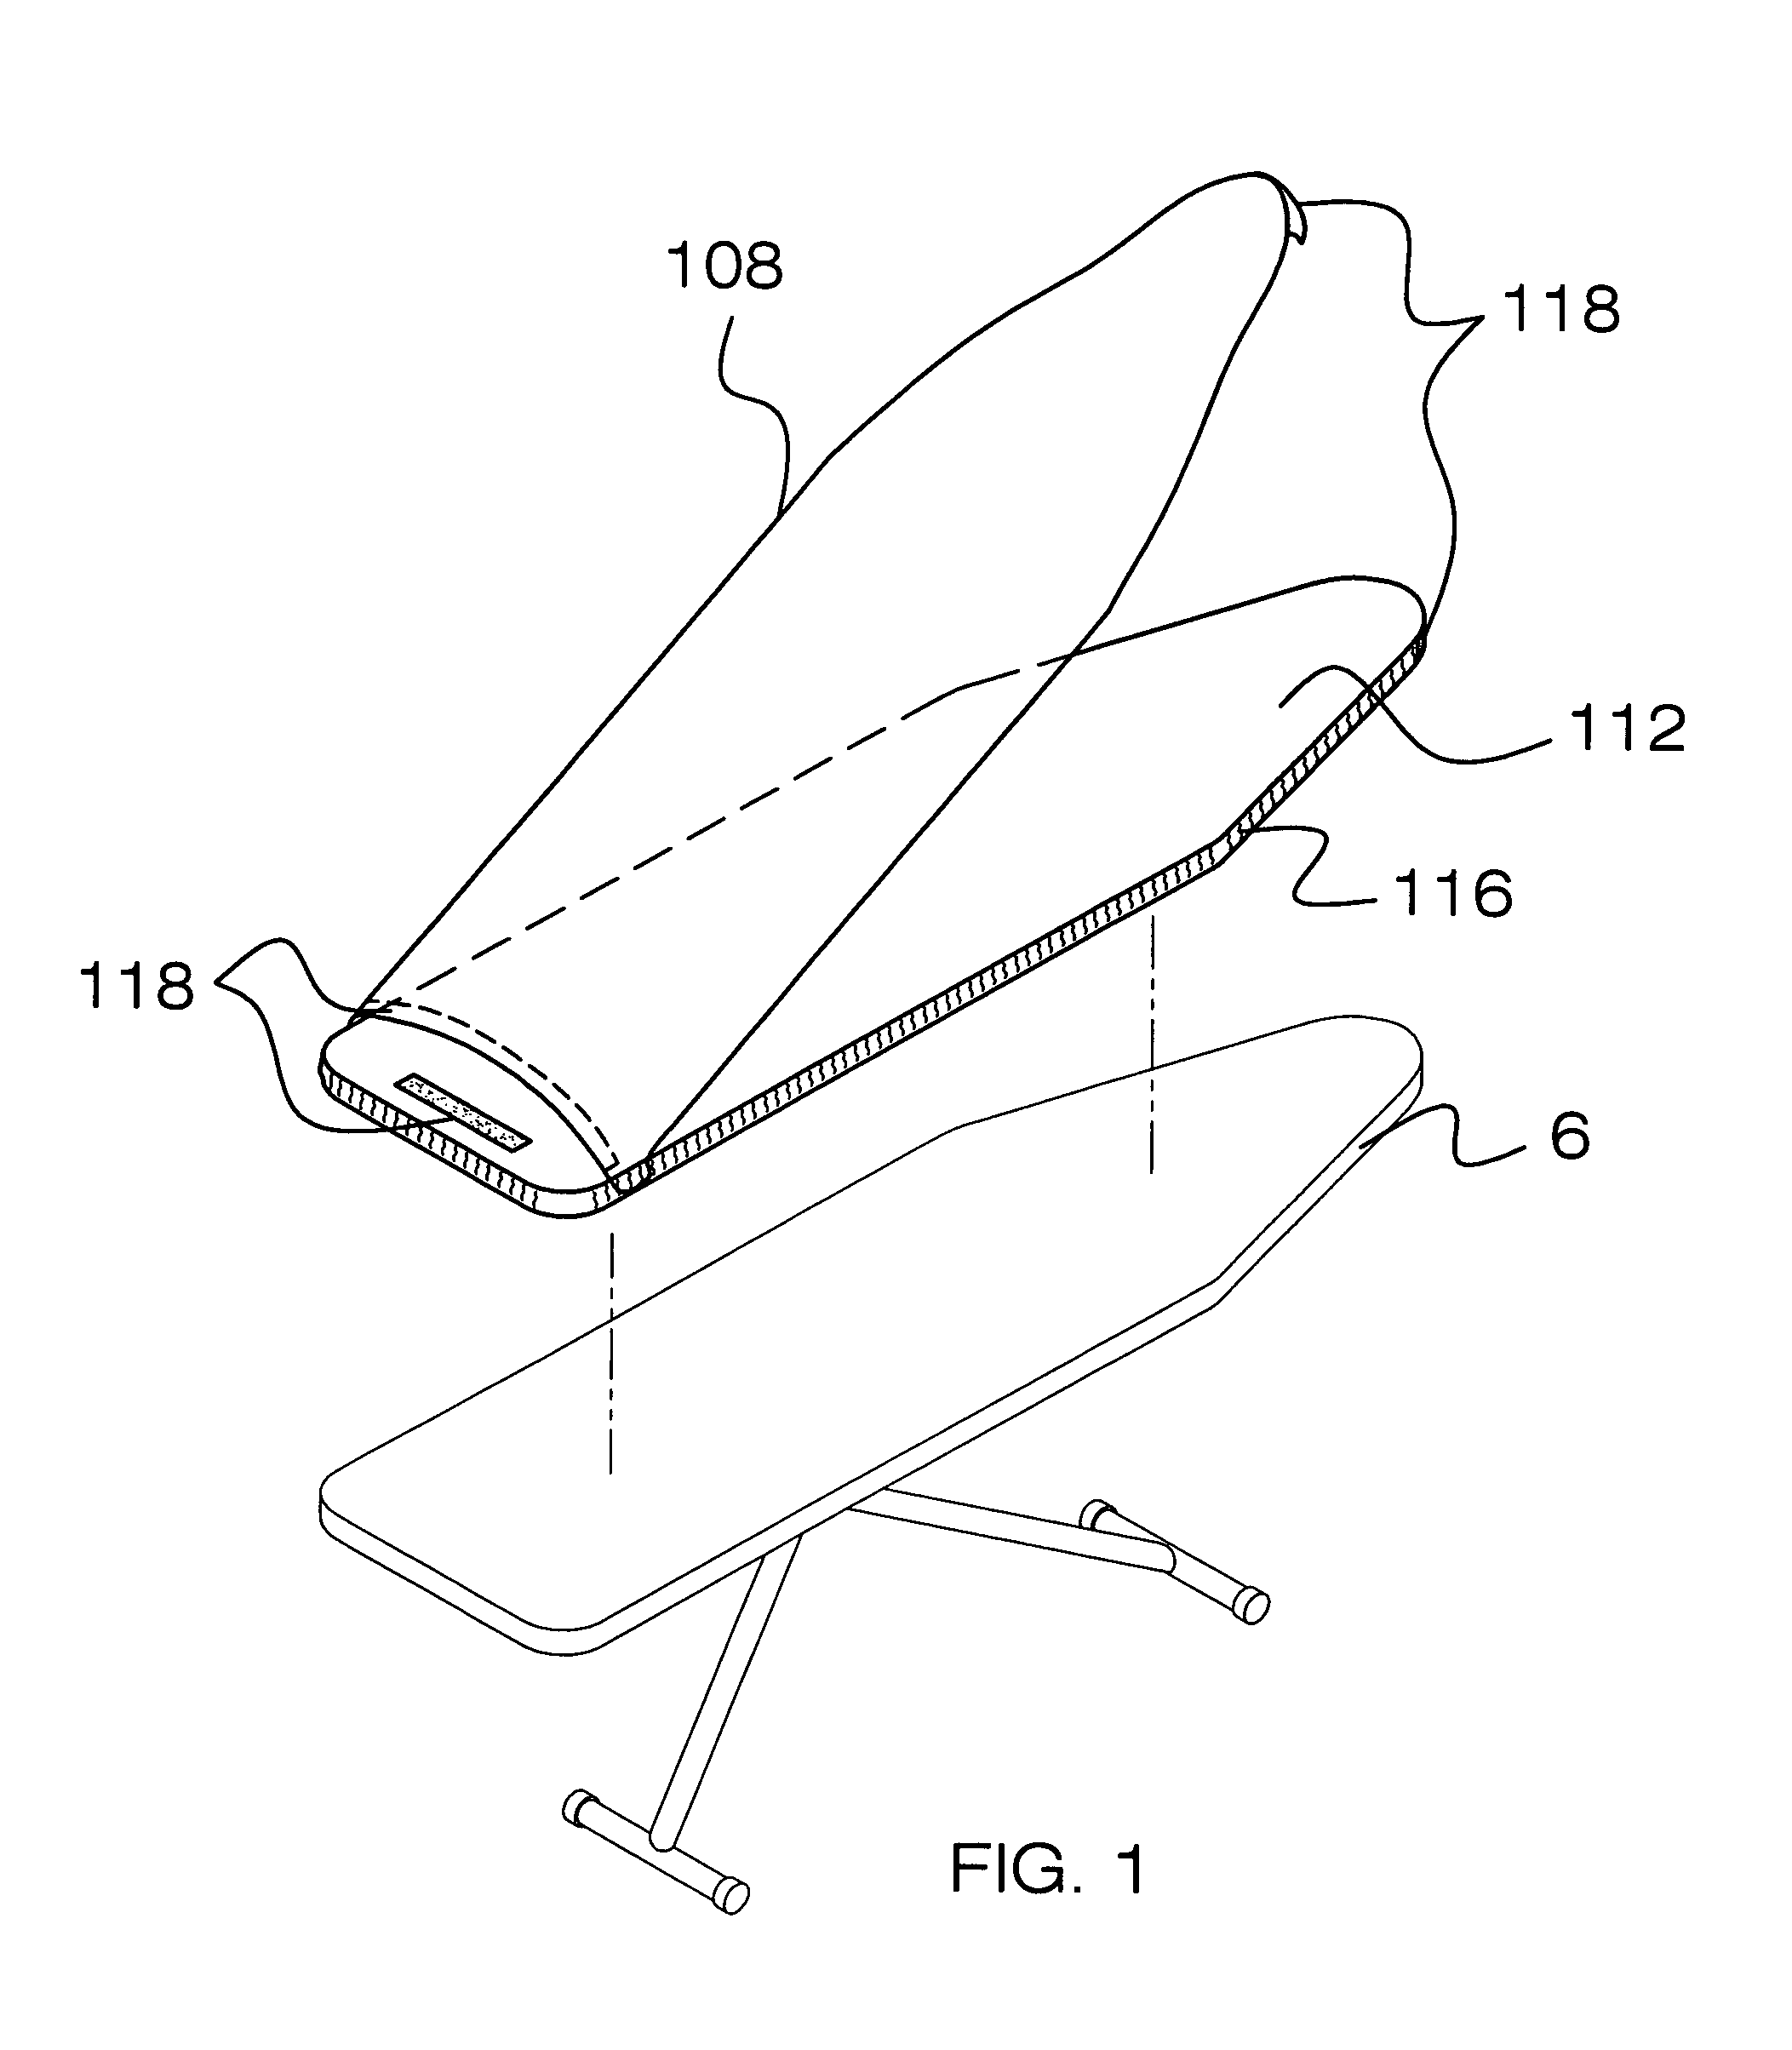 Apparatus for pre-starched ironing pads